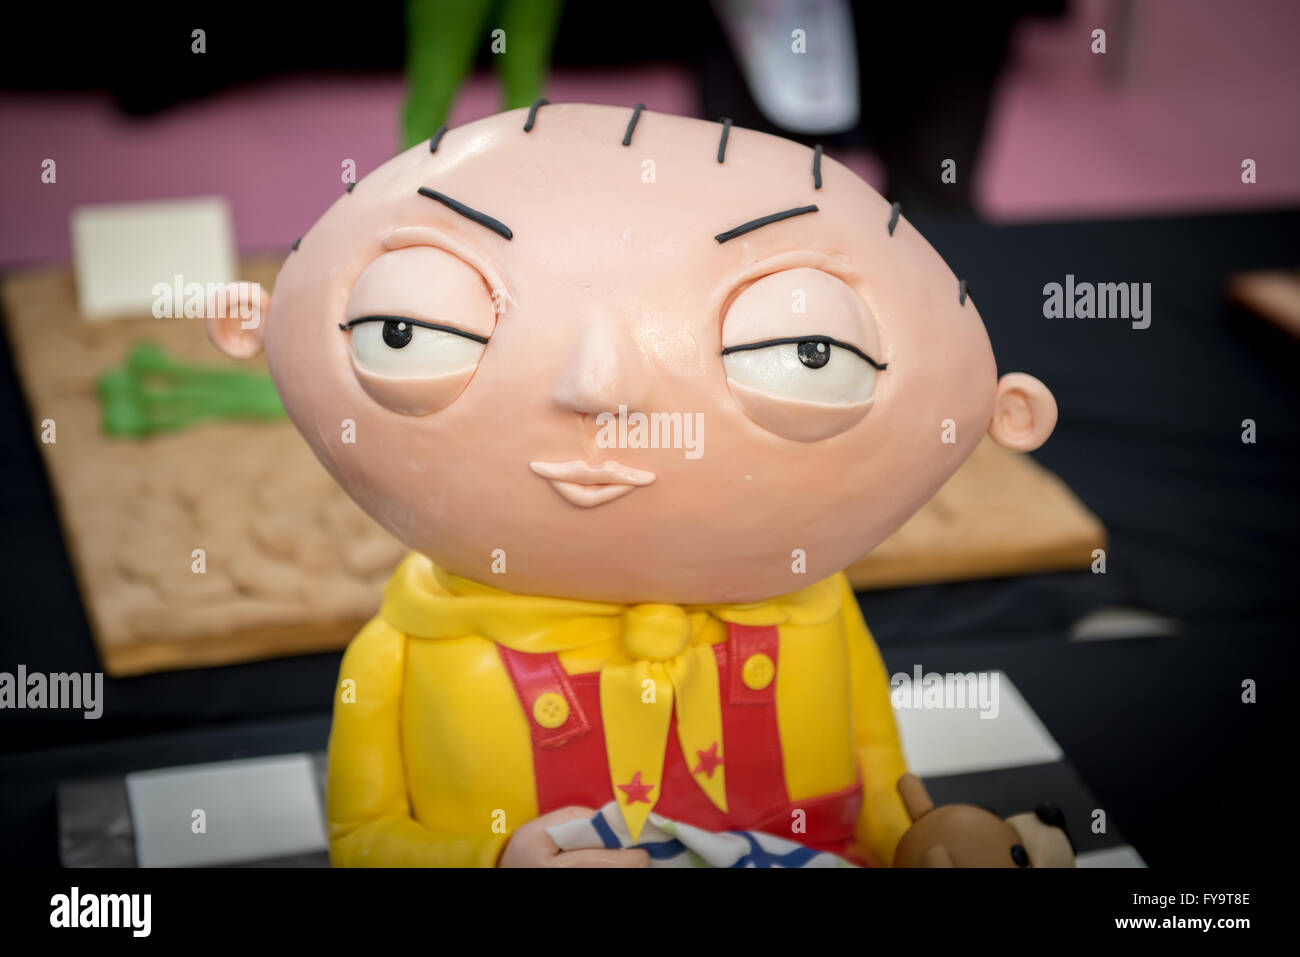 How Old Is Stewie Griffin